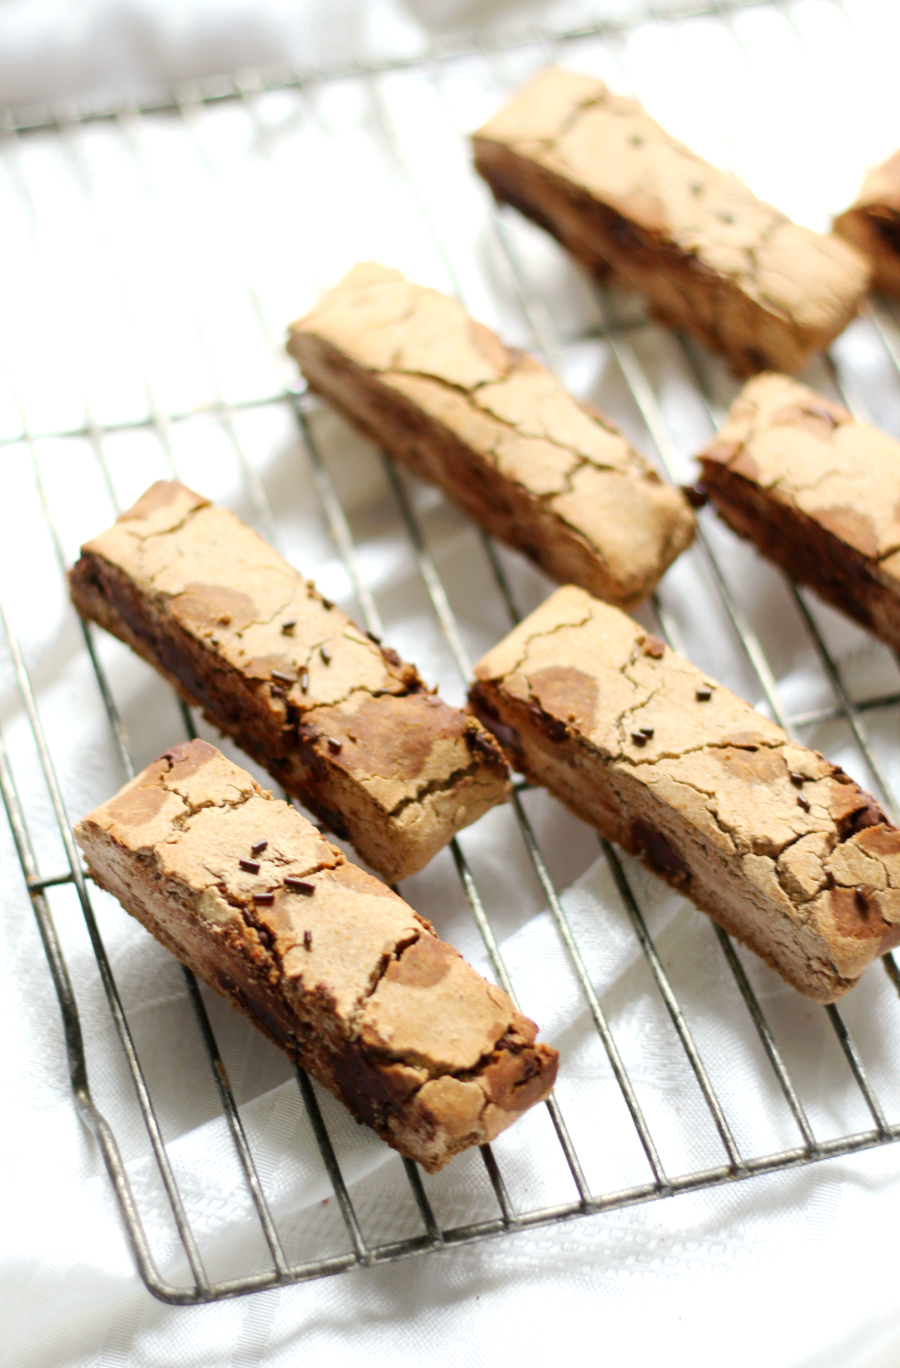 Chocolate Chip Teff Biscotti | Strength and Sunshine @RebeccaGF666 Grab your cup of coffee and a Chocolate Chip Teff Biscotti for a few moments of at-home bakery bliss! A gluten-free, nut-free, allergy-free, and vegan healthy recipe so you can enjoy this Italian classic once again without sacrificing flavor or crunch!